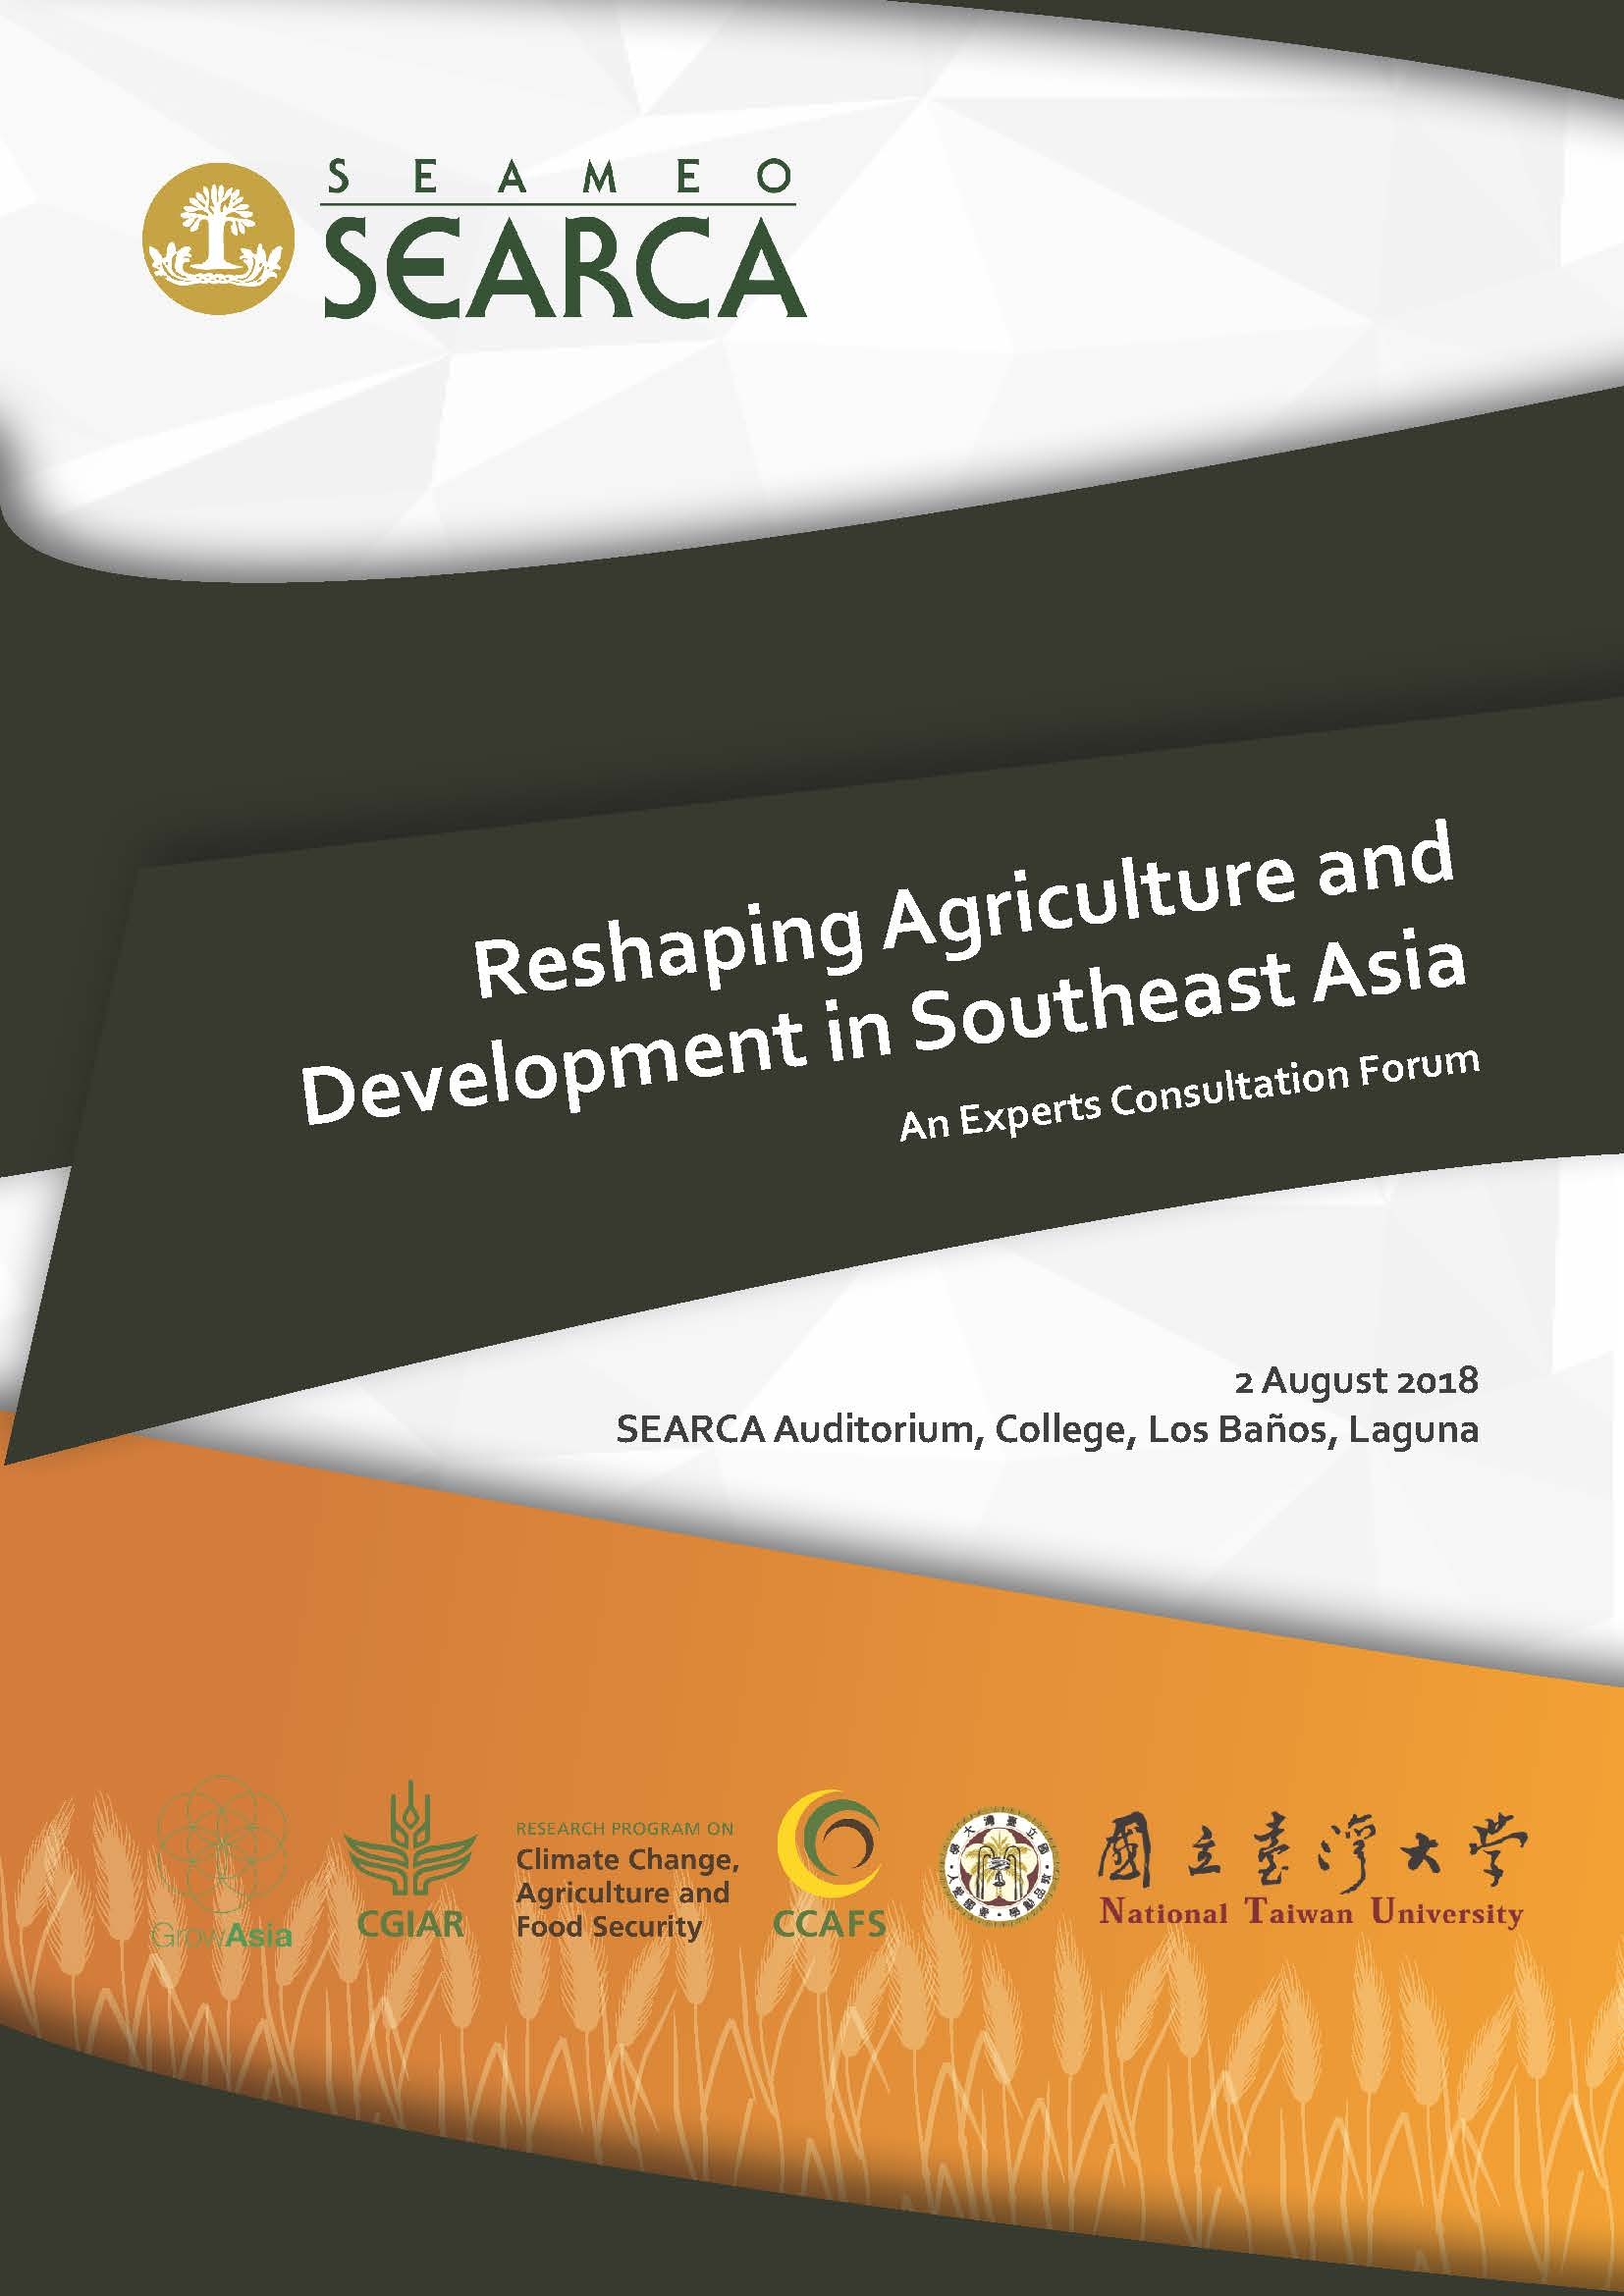 Reshaping Agriculture and Development in Southeast Asia: An Experts Consultation Forum